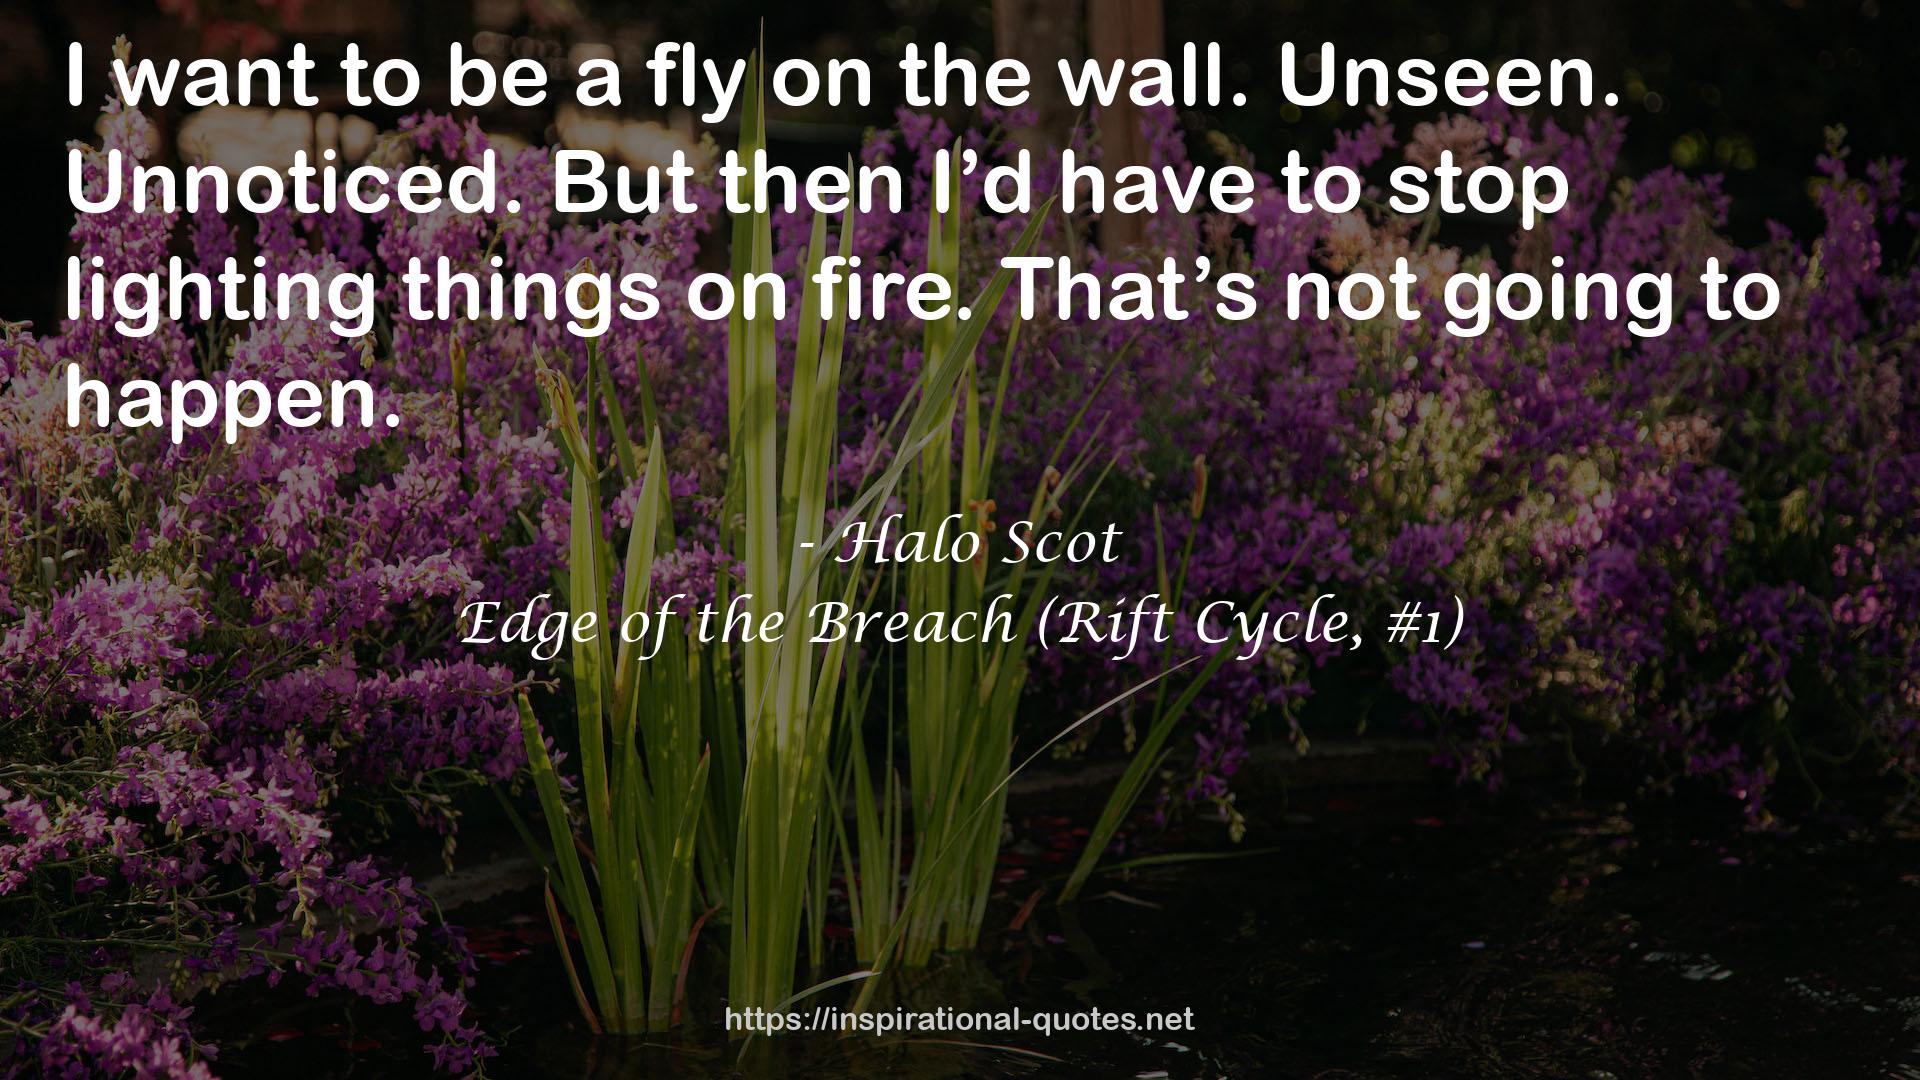 Edge of the Breach (Rift Cycle, #1) QUOTES